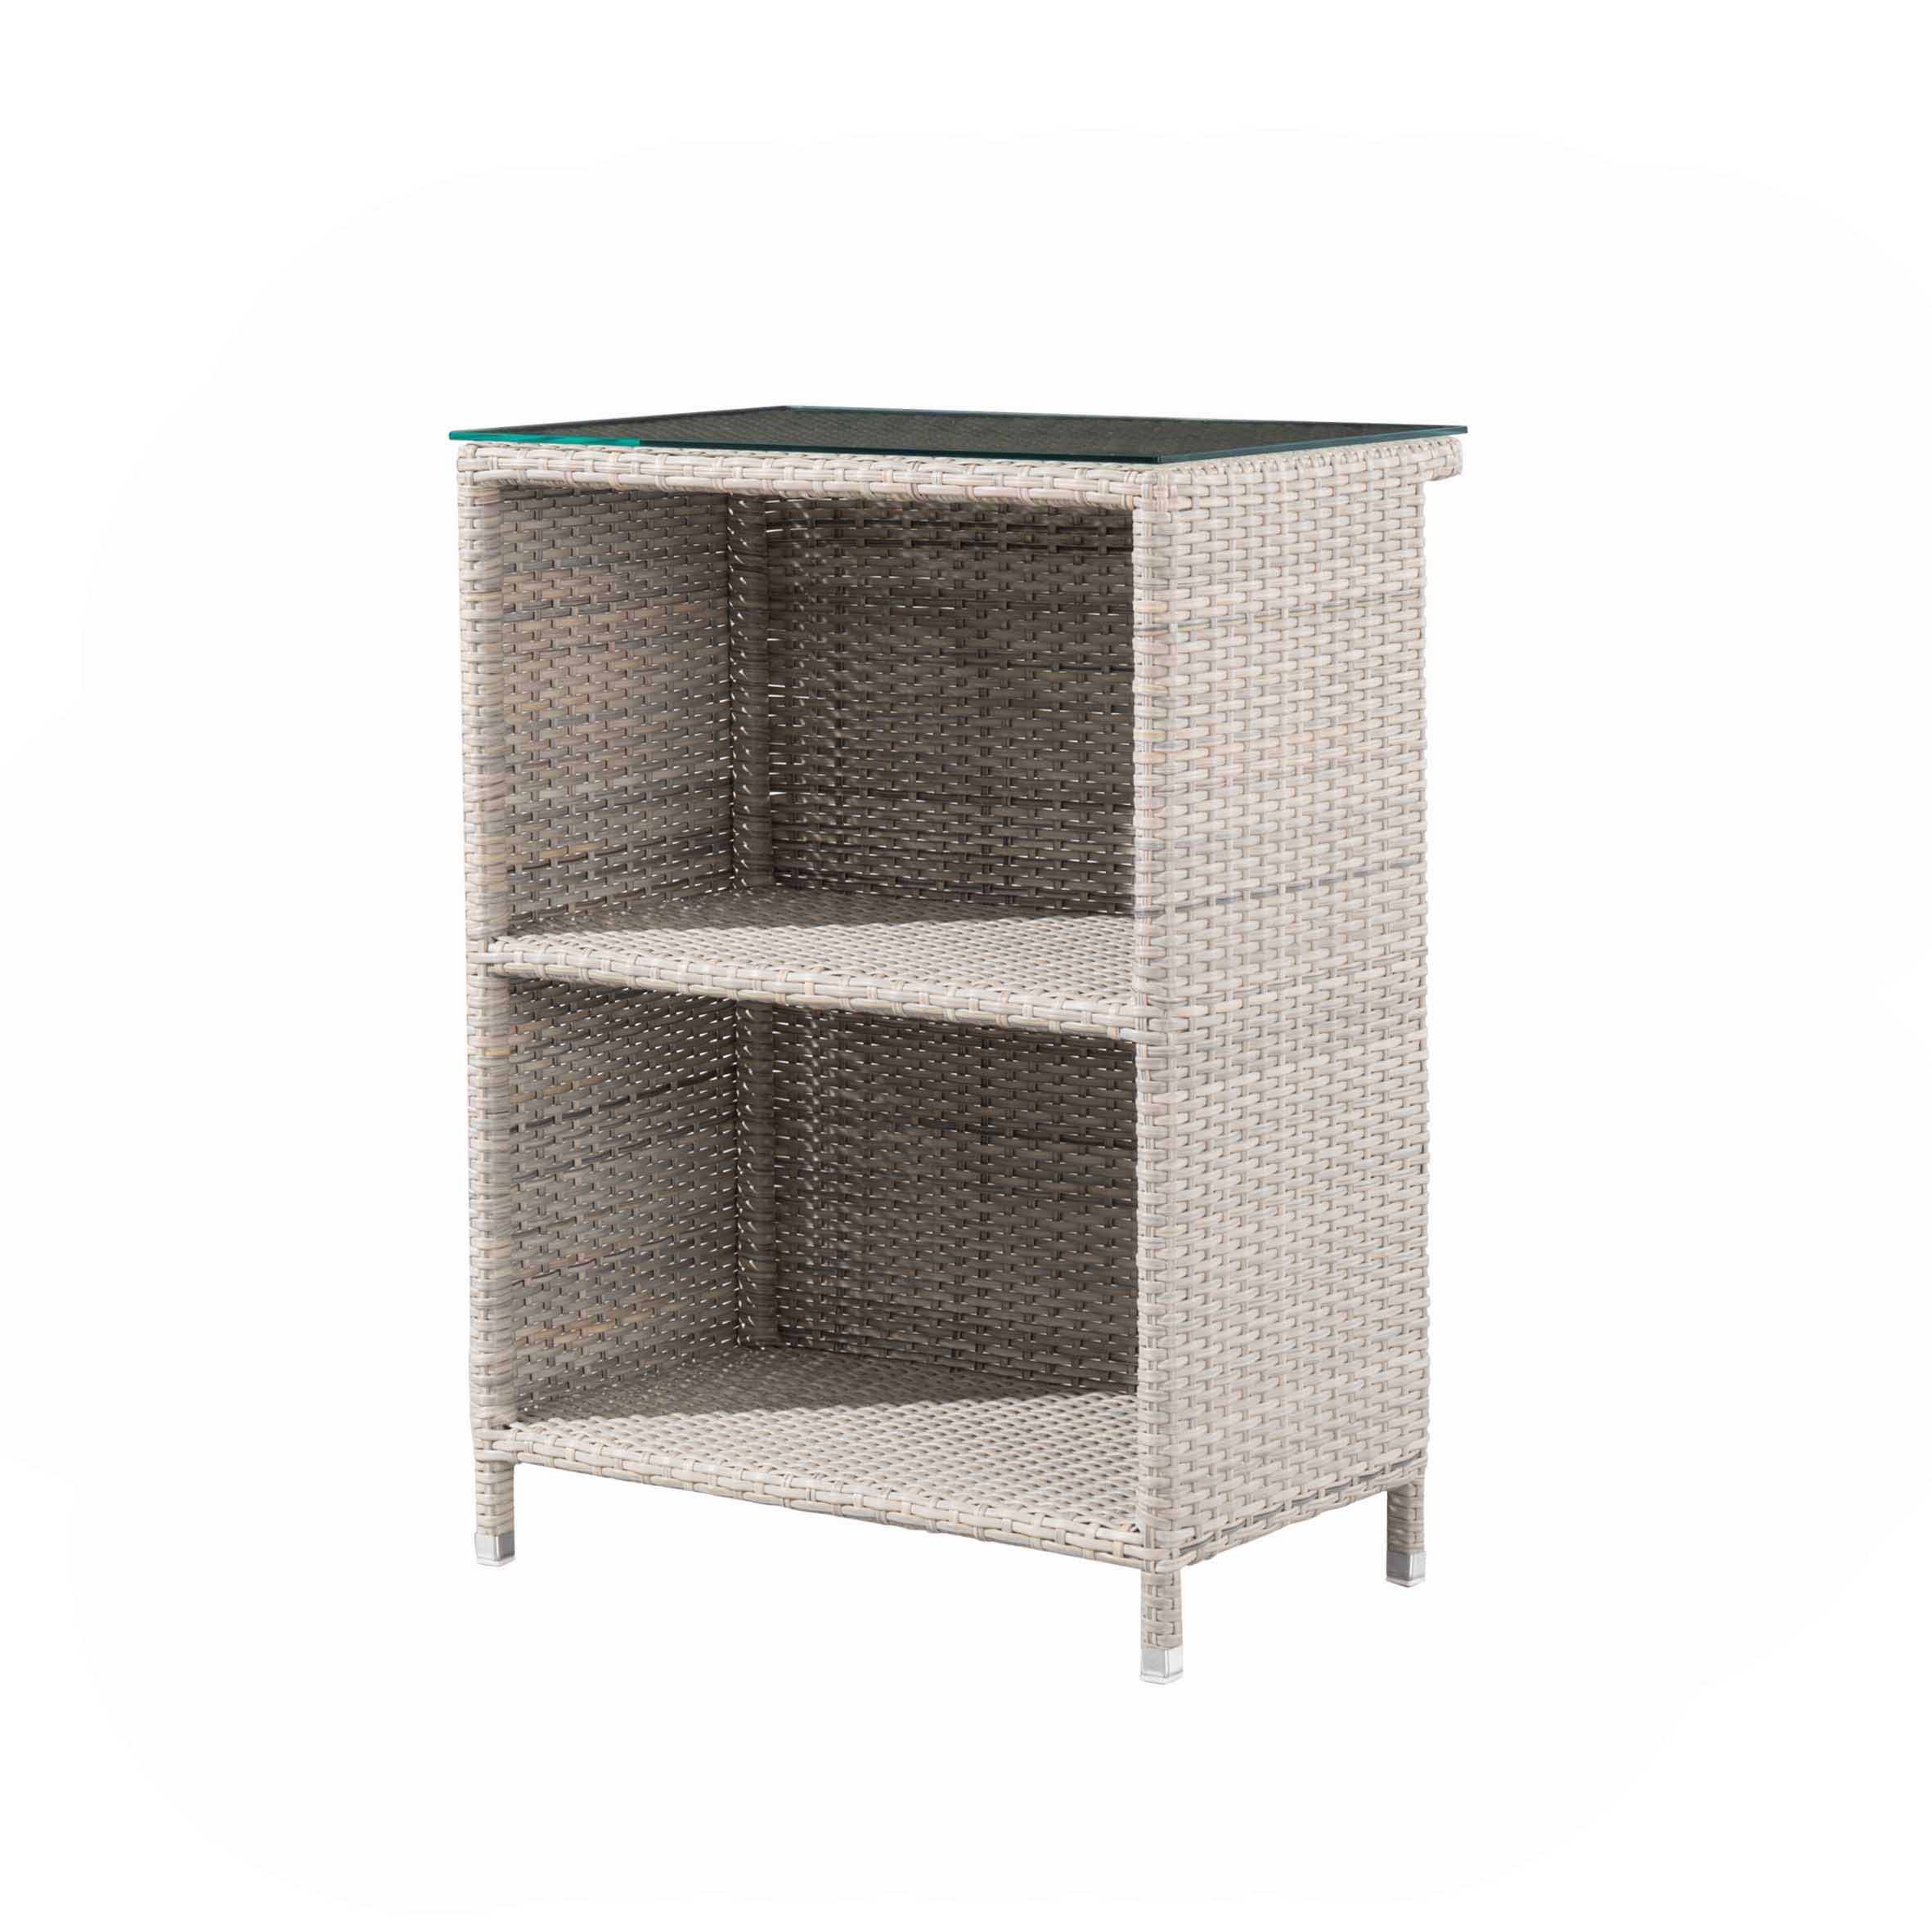 Ideal rattan square bar table S2